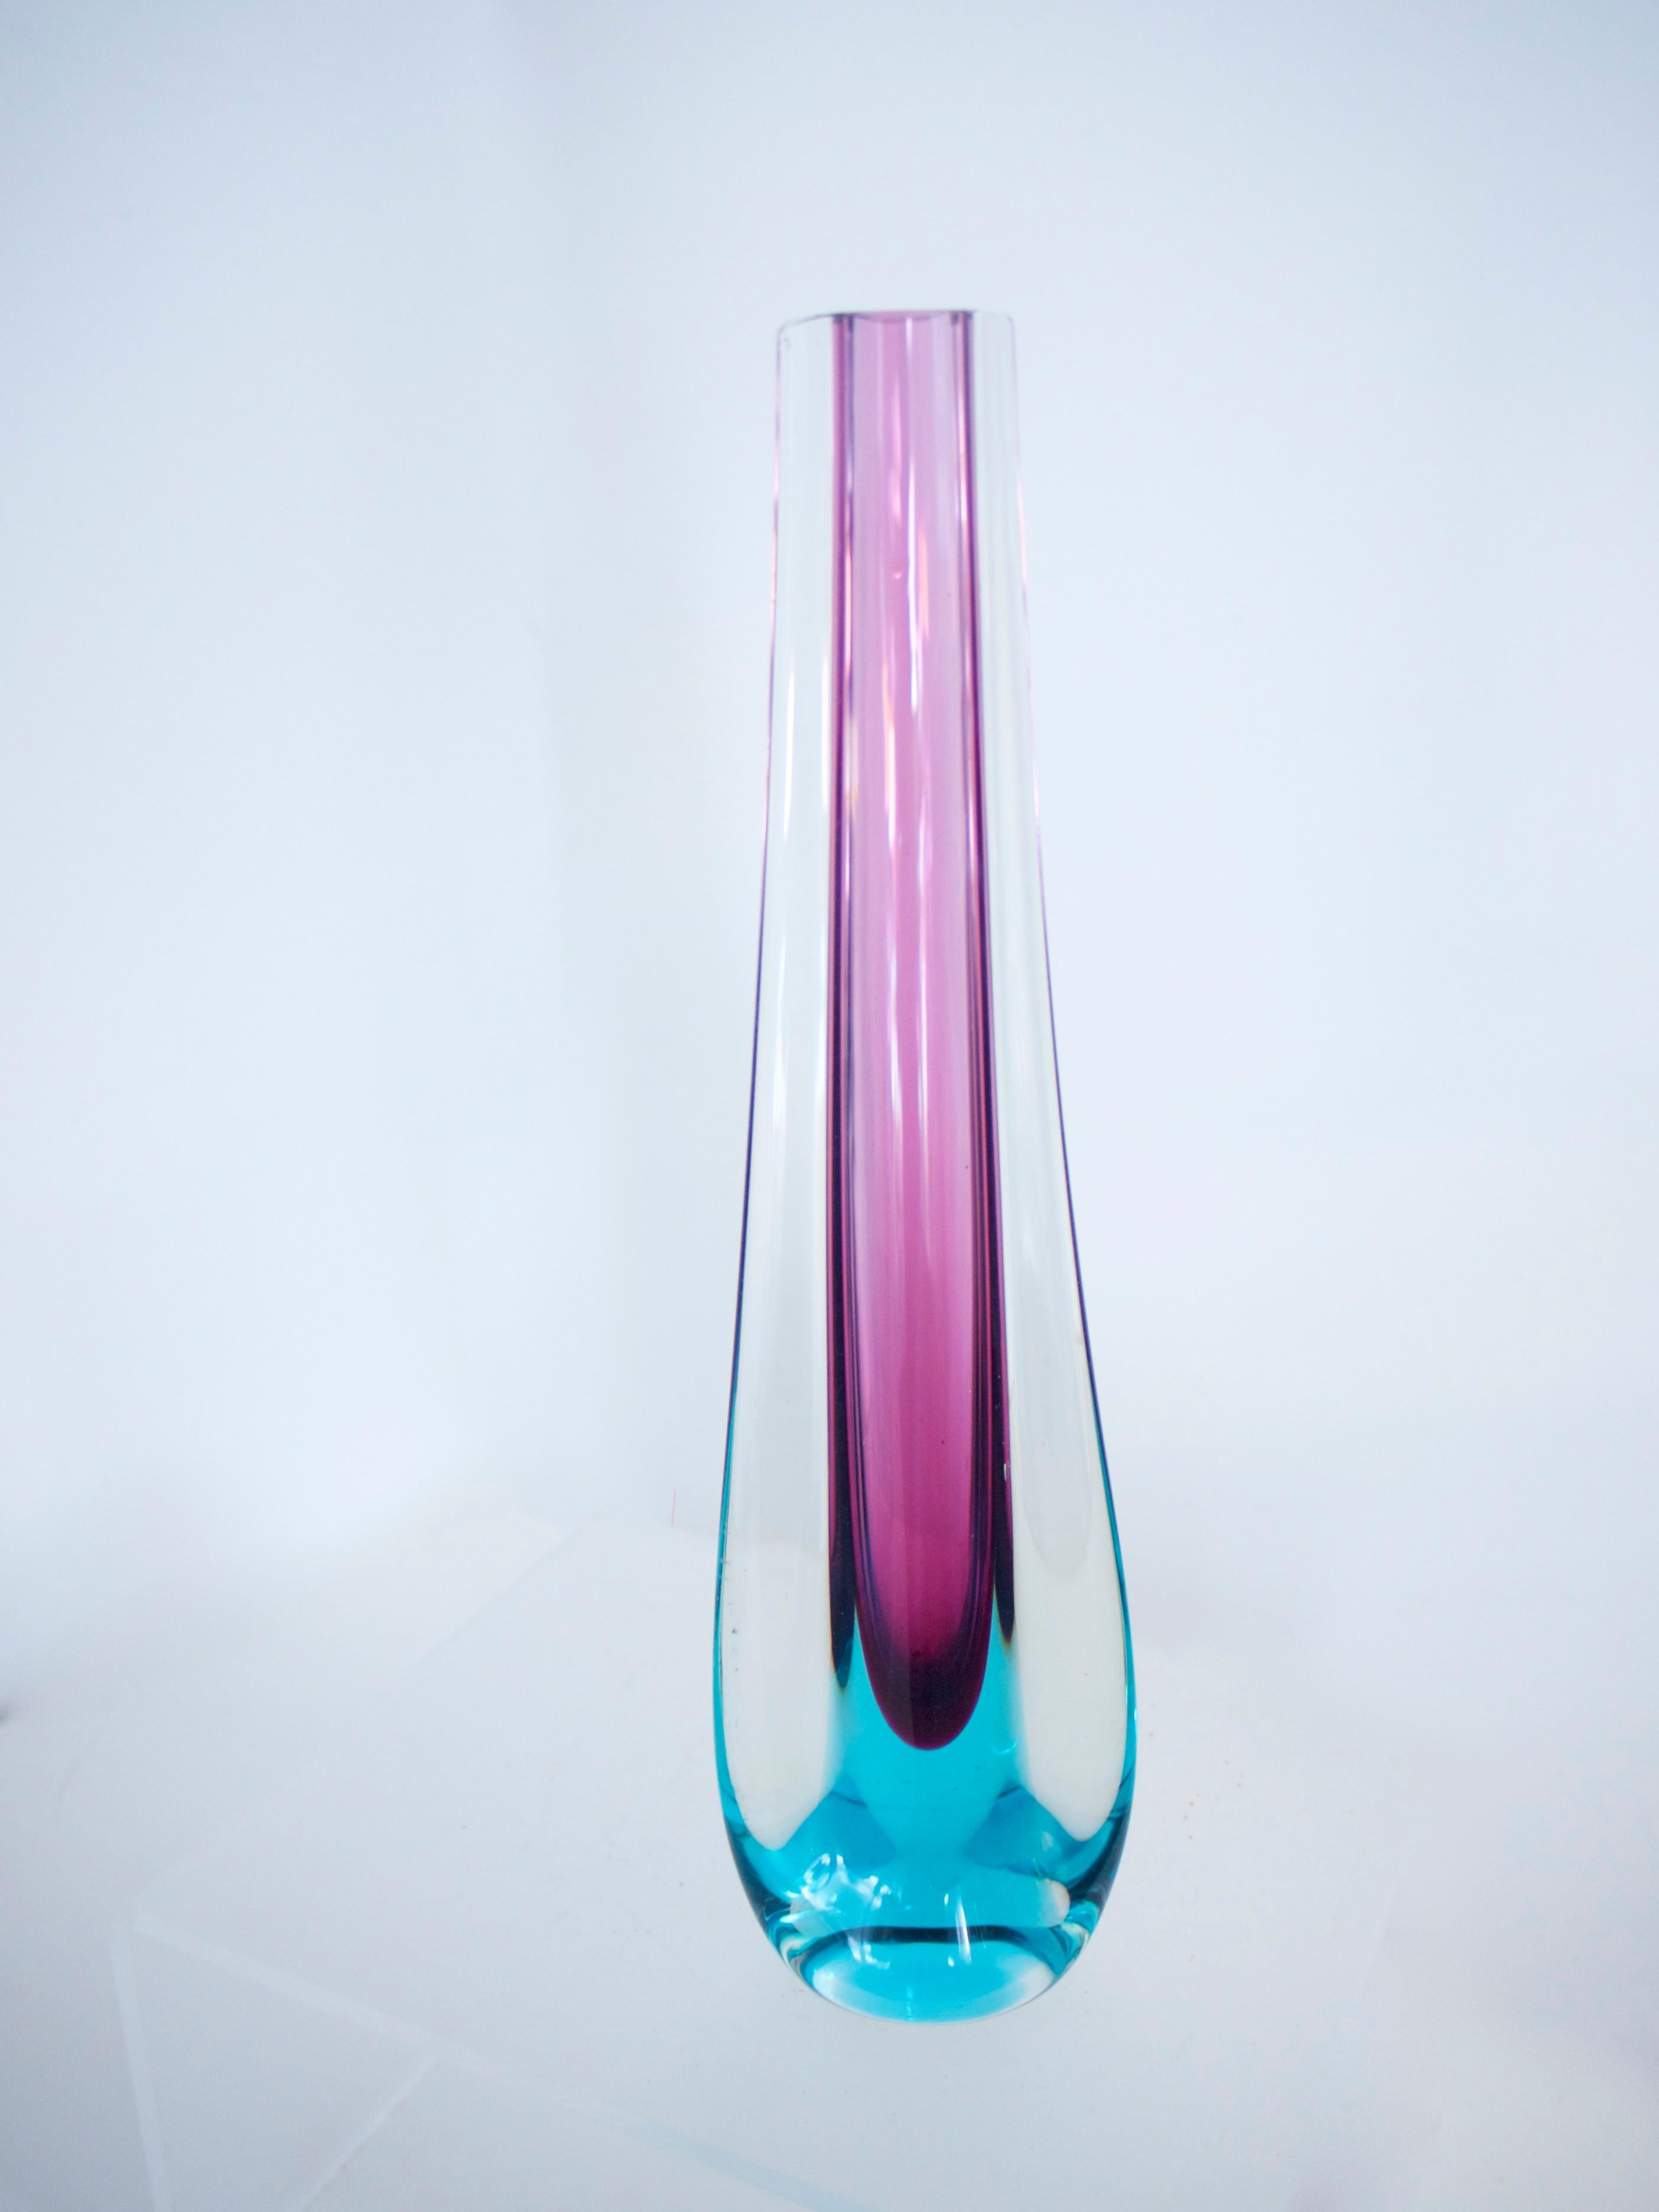 Mid-20th Century Modernist Glass Vases Murano Teardrop by Ferro and 'Block' Vase by Nuutajarvi For Sale